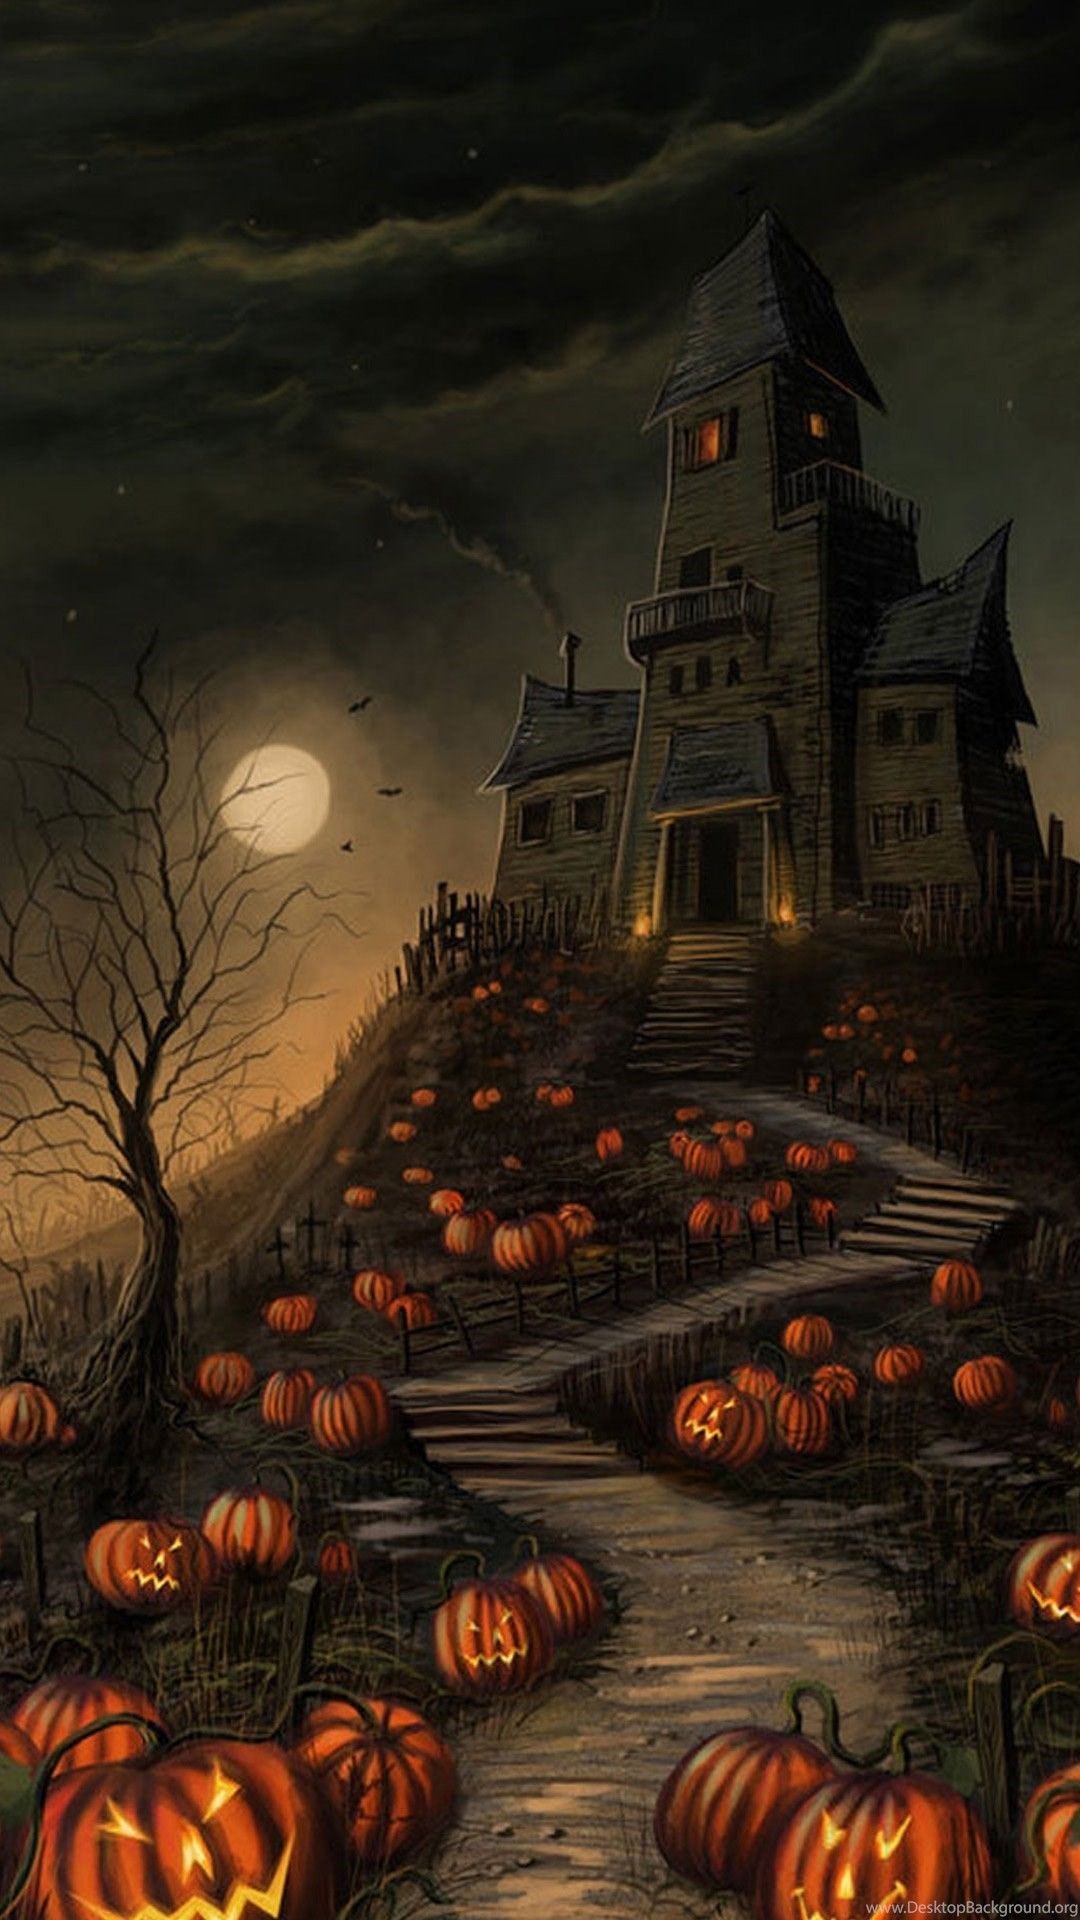 Best Halloween wallpapers for iPhone and iPad 2021